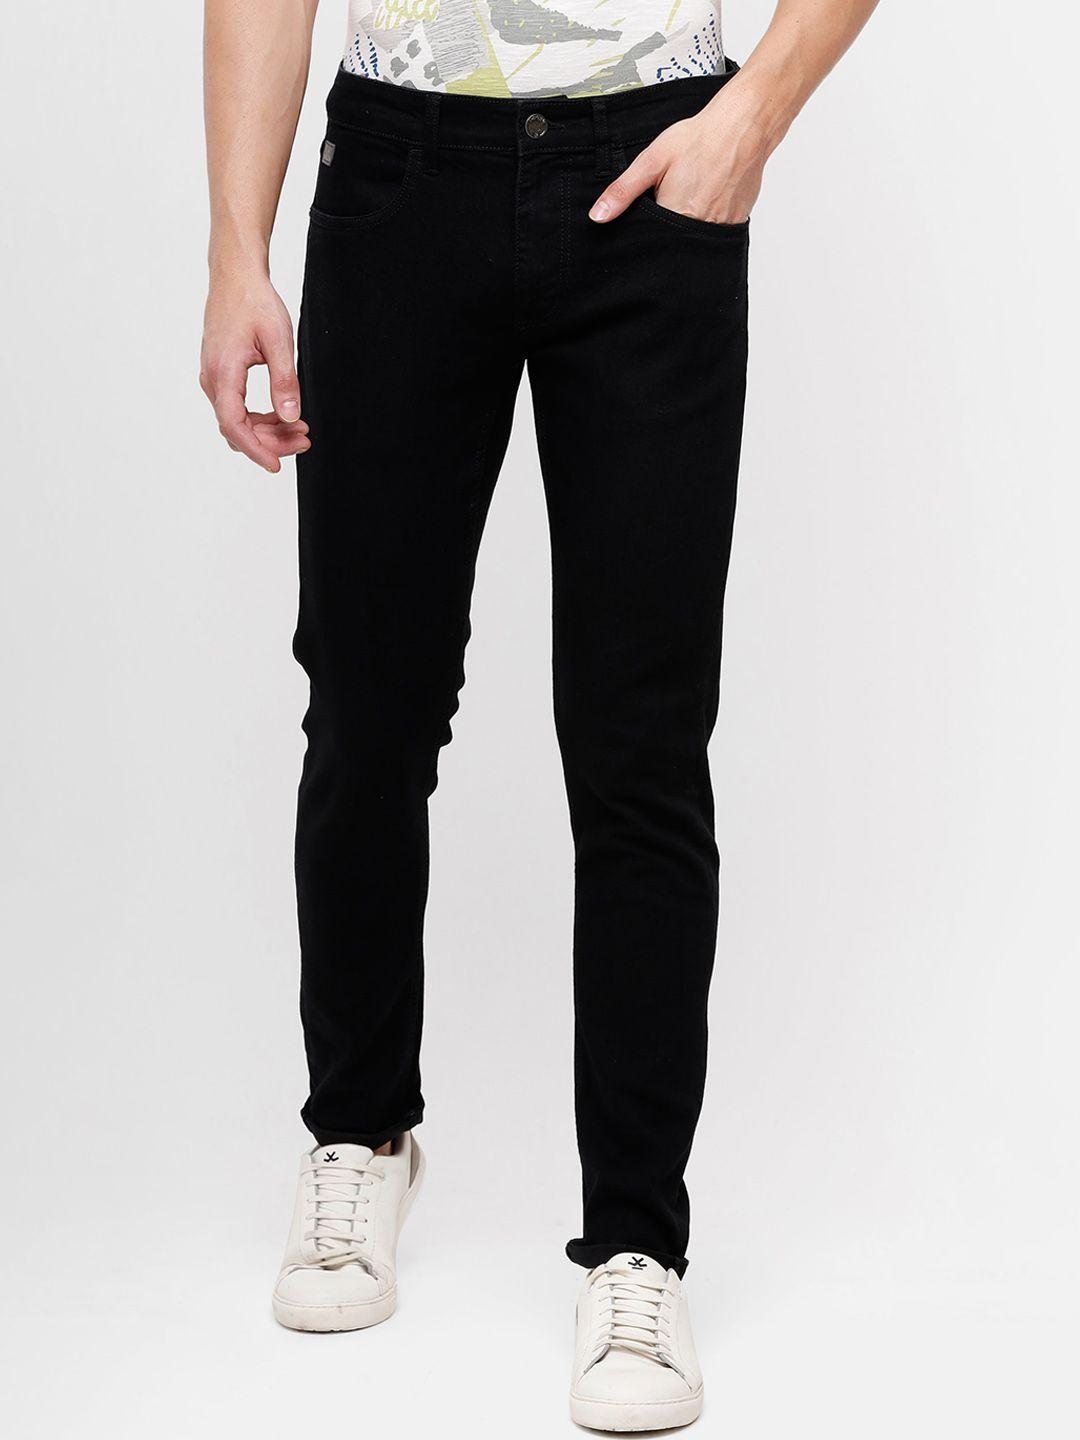 wrogn-men-slim-fit-mid-rise-clean-look-stretchable-jeans